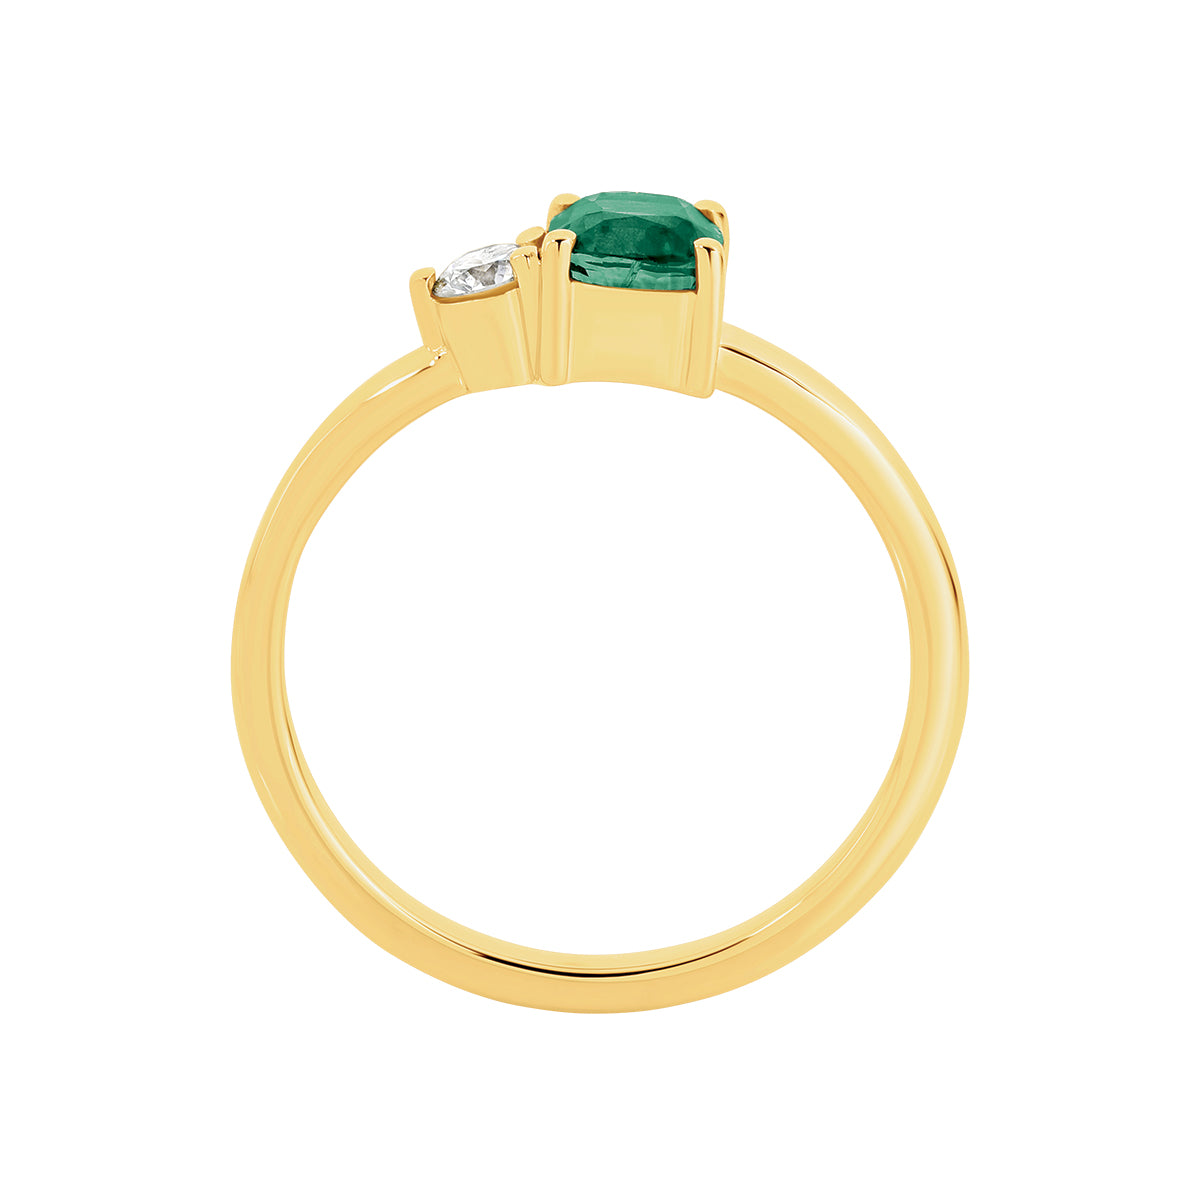 Natural 0.32ct oval emerald and 0.12ct diamond ring in 18ct yellow gold